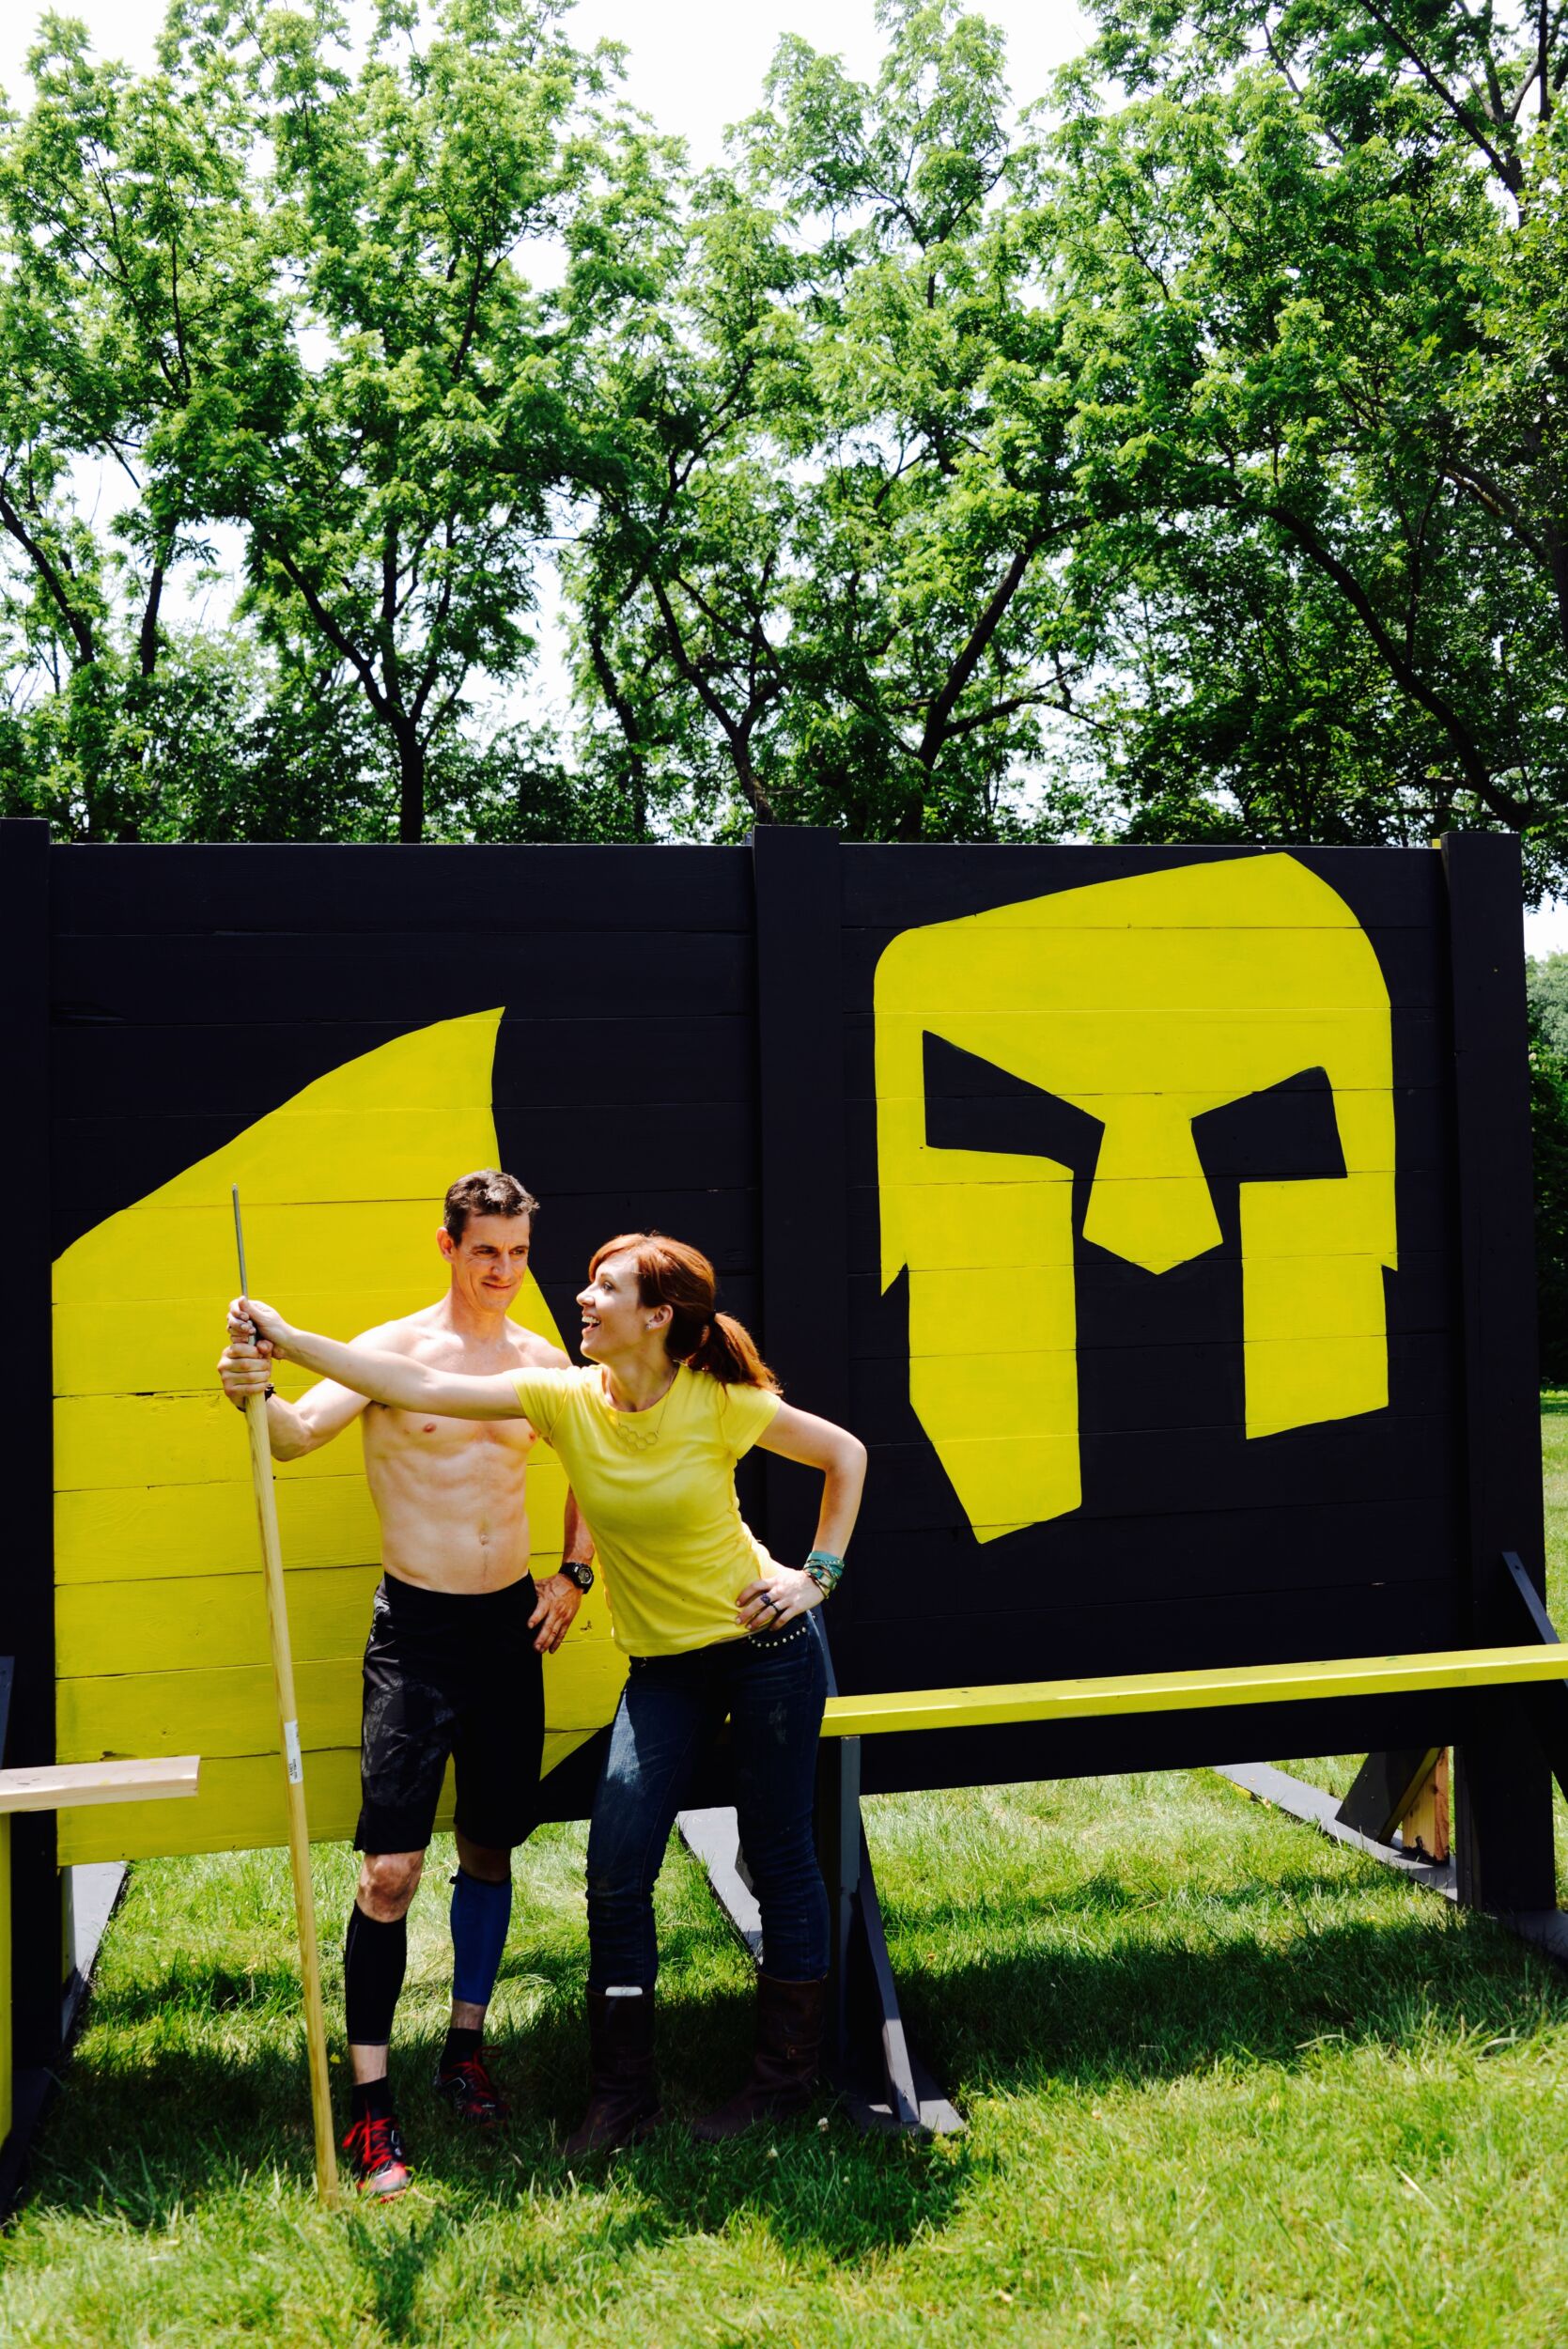 Mark and Theresa built a Spartan Race training wall for the YMCA